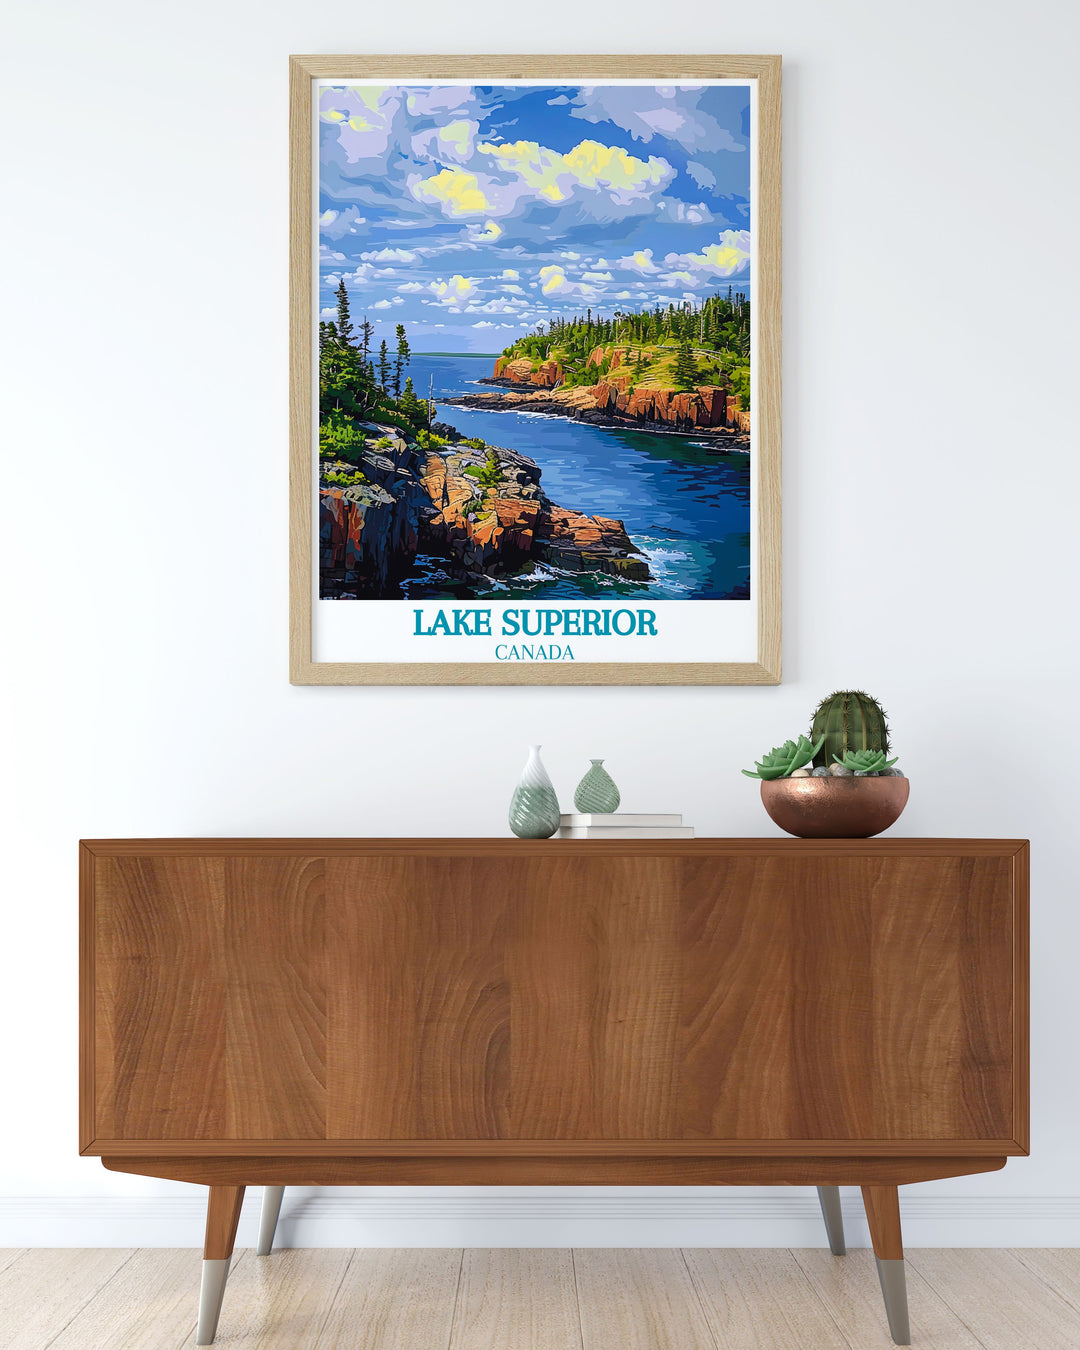 Isle Royale National Parks untouched beauty showcased in a detailed travel poster, inviting viewers to explore its wilderness.